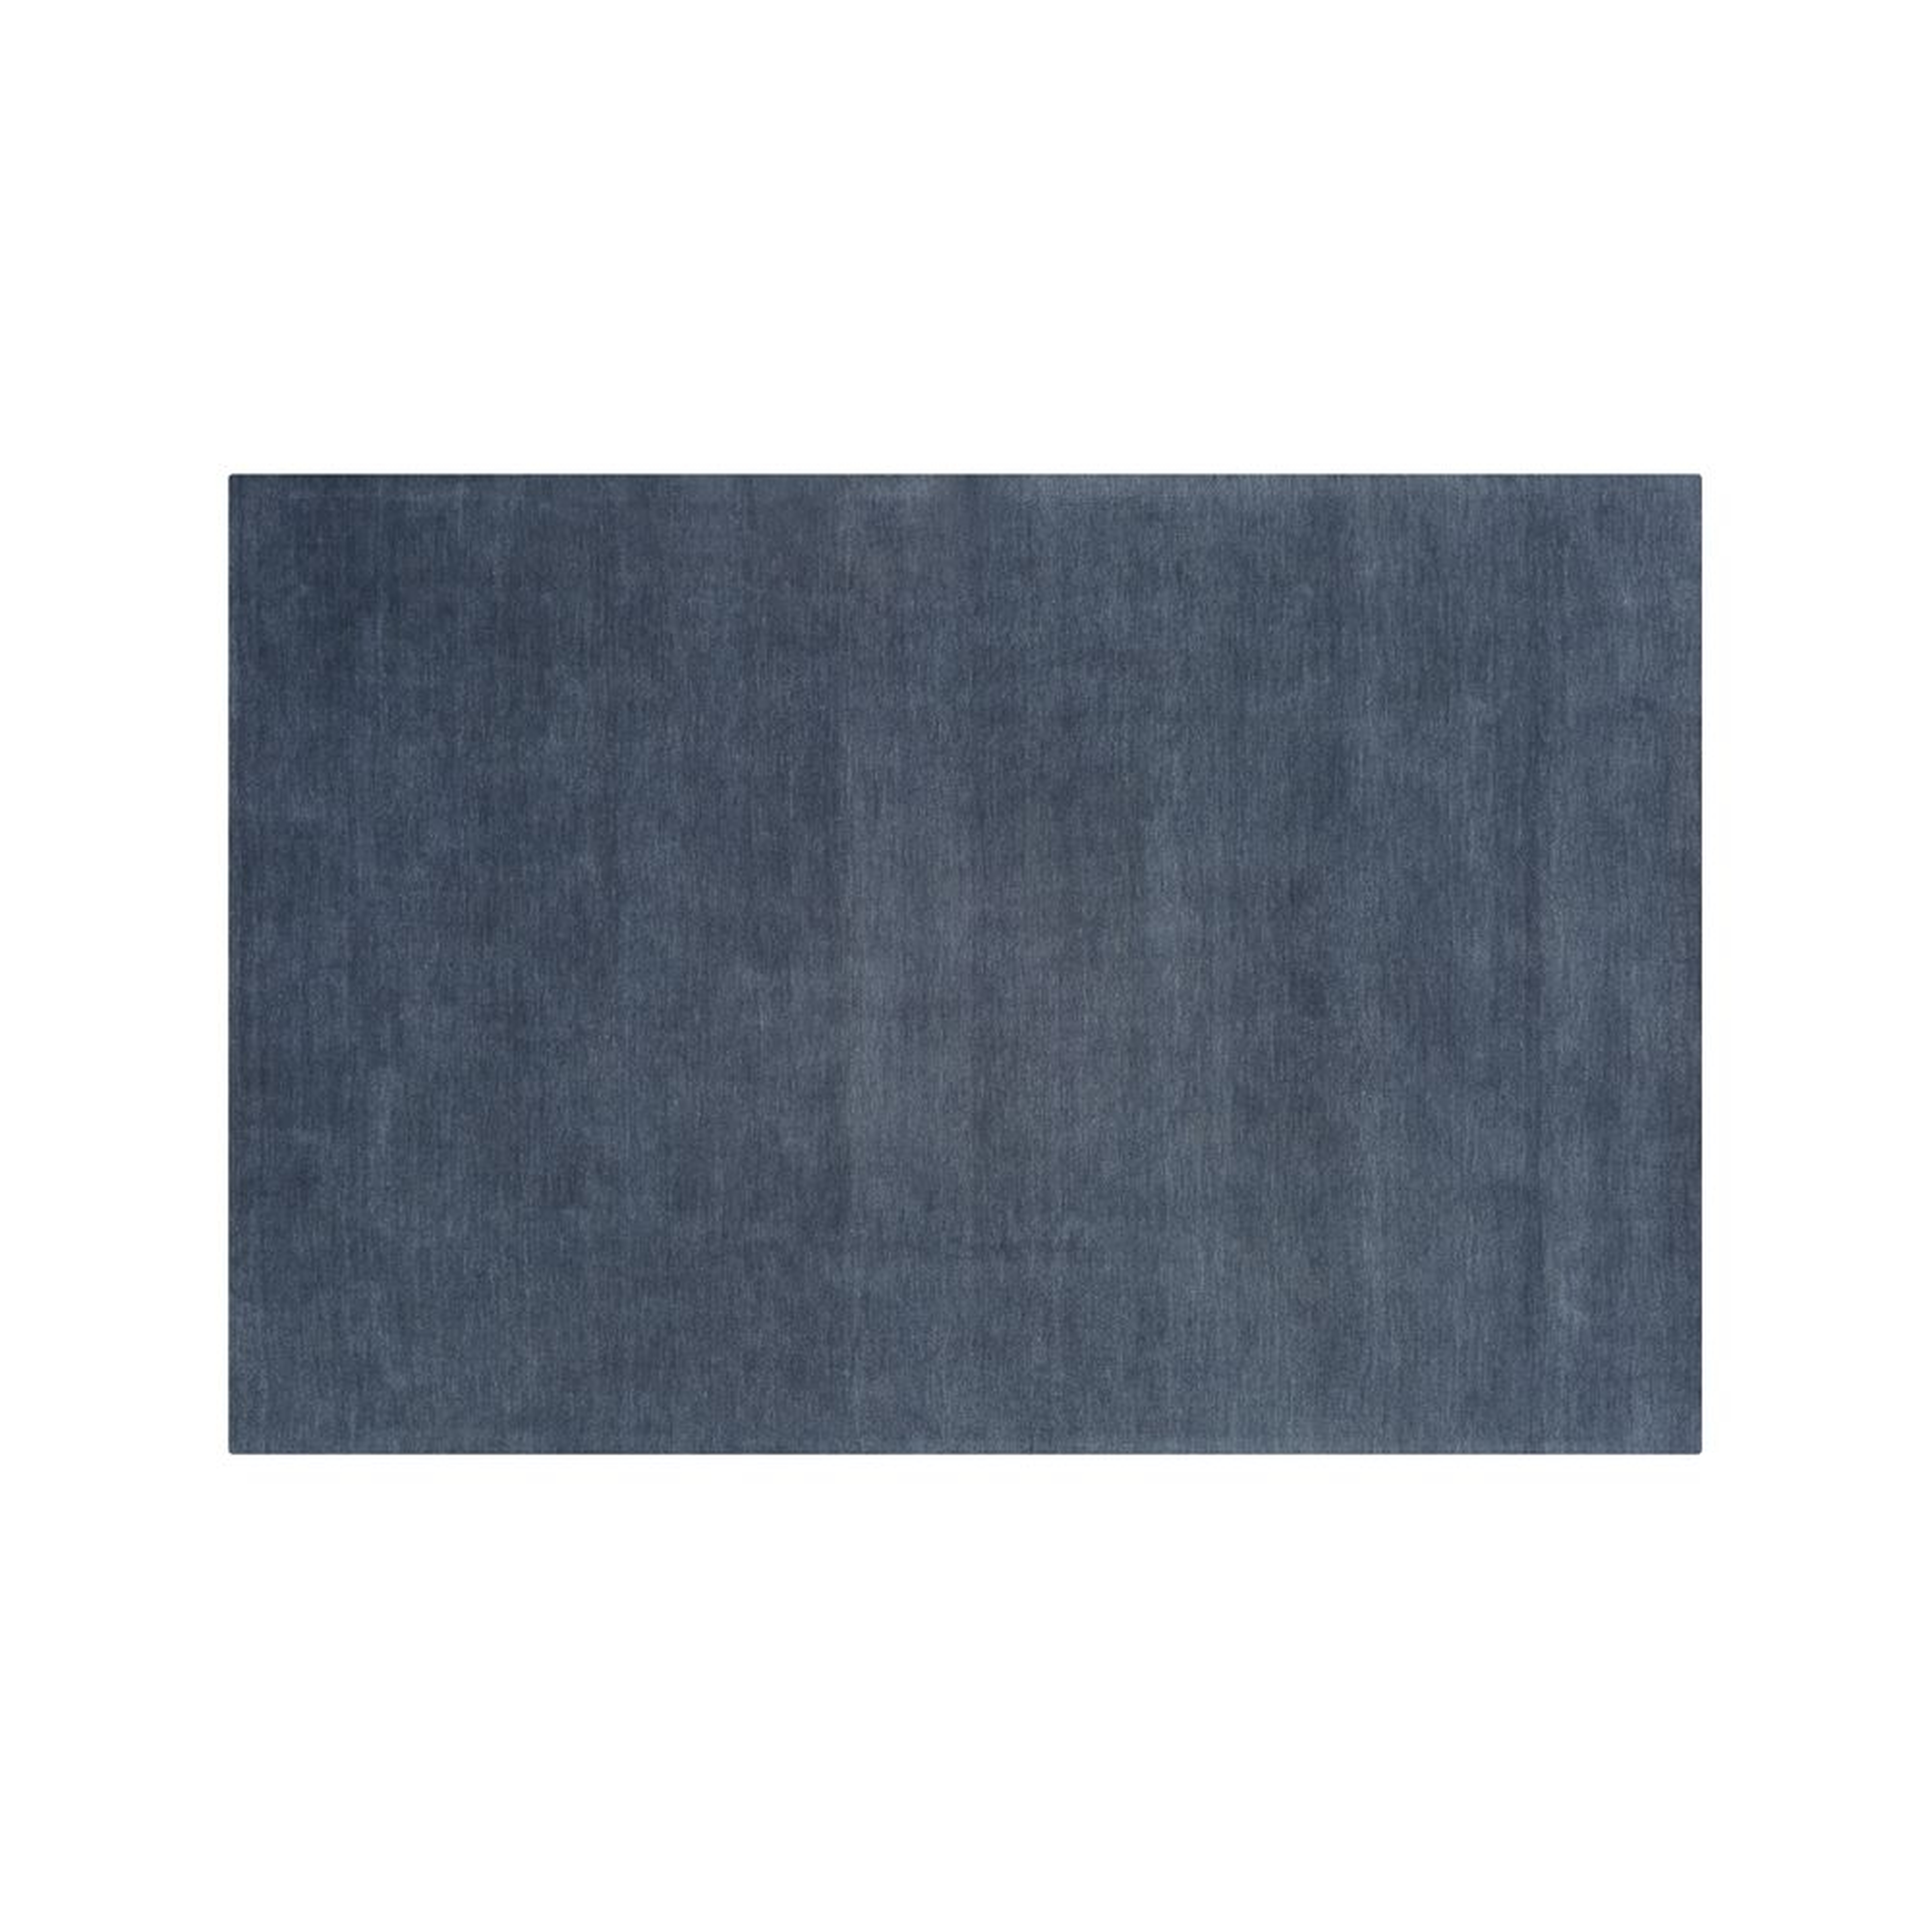 Baxter Blue Wool Area Rug 9'x12' - Crate and Barrel